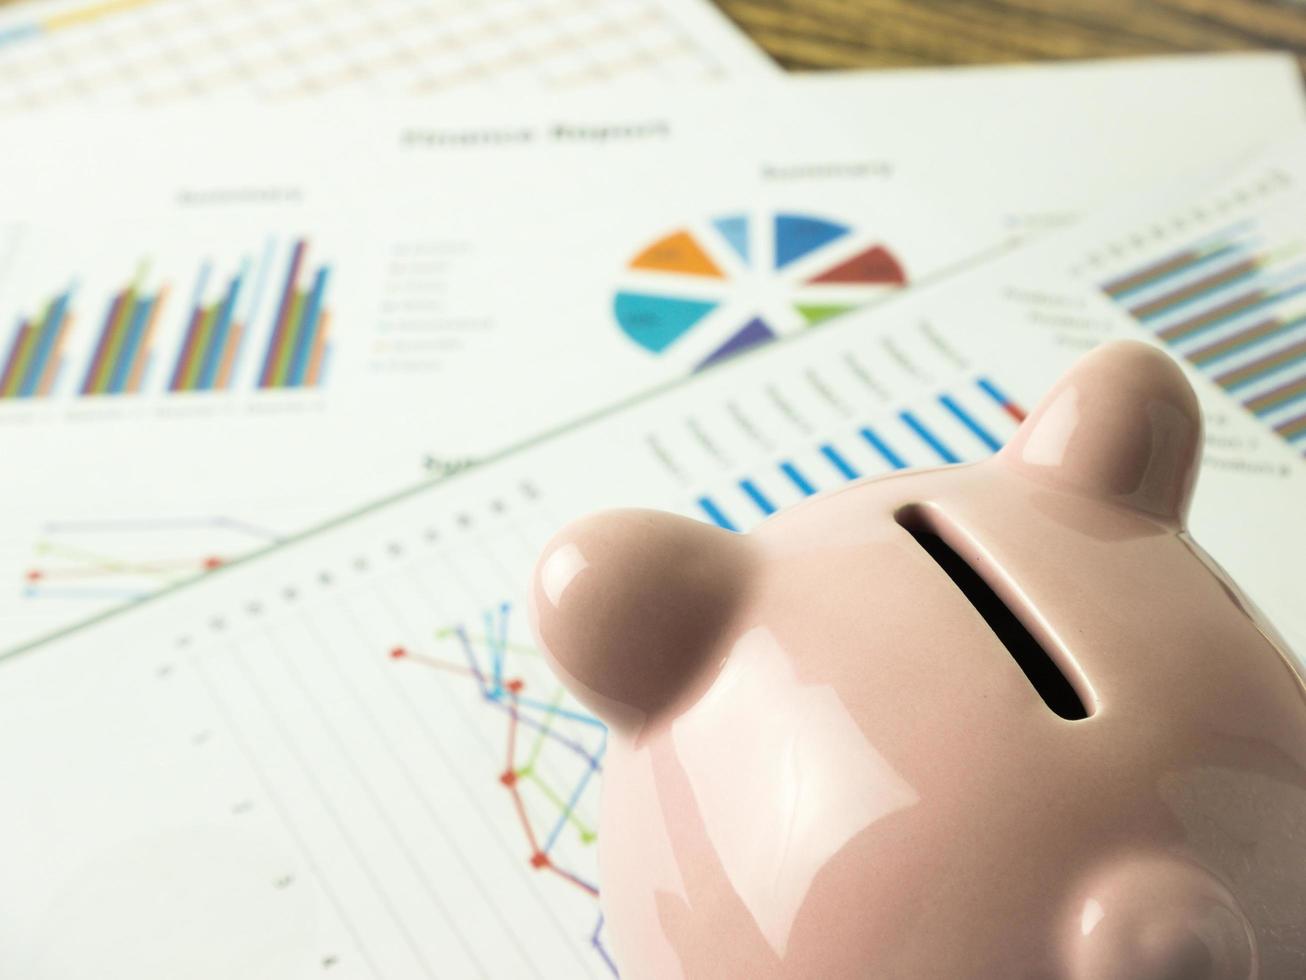 Pink piggy bank on business graph, finances and economy concept photo